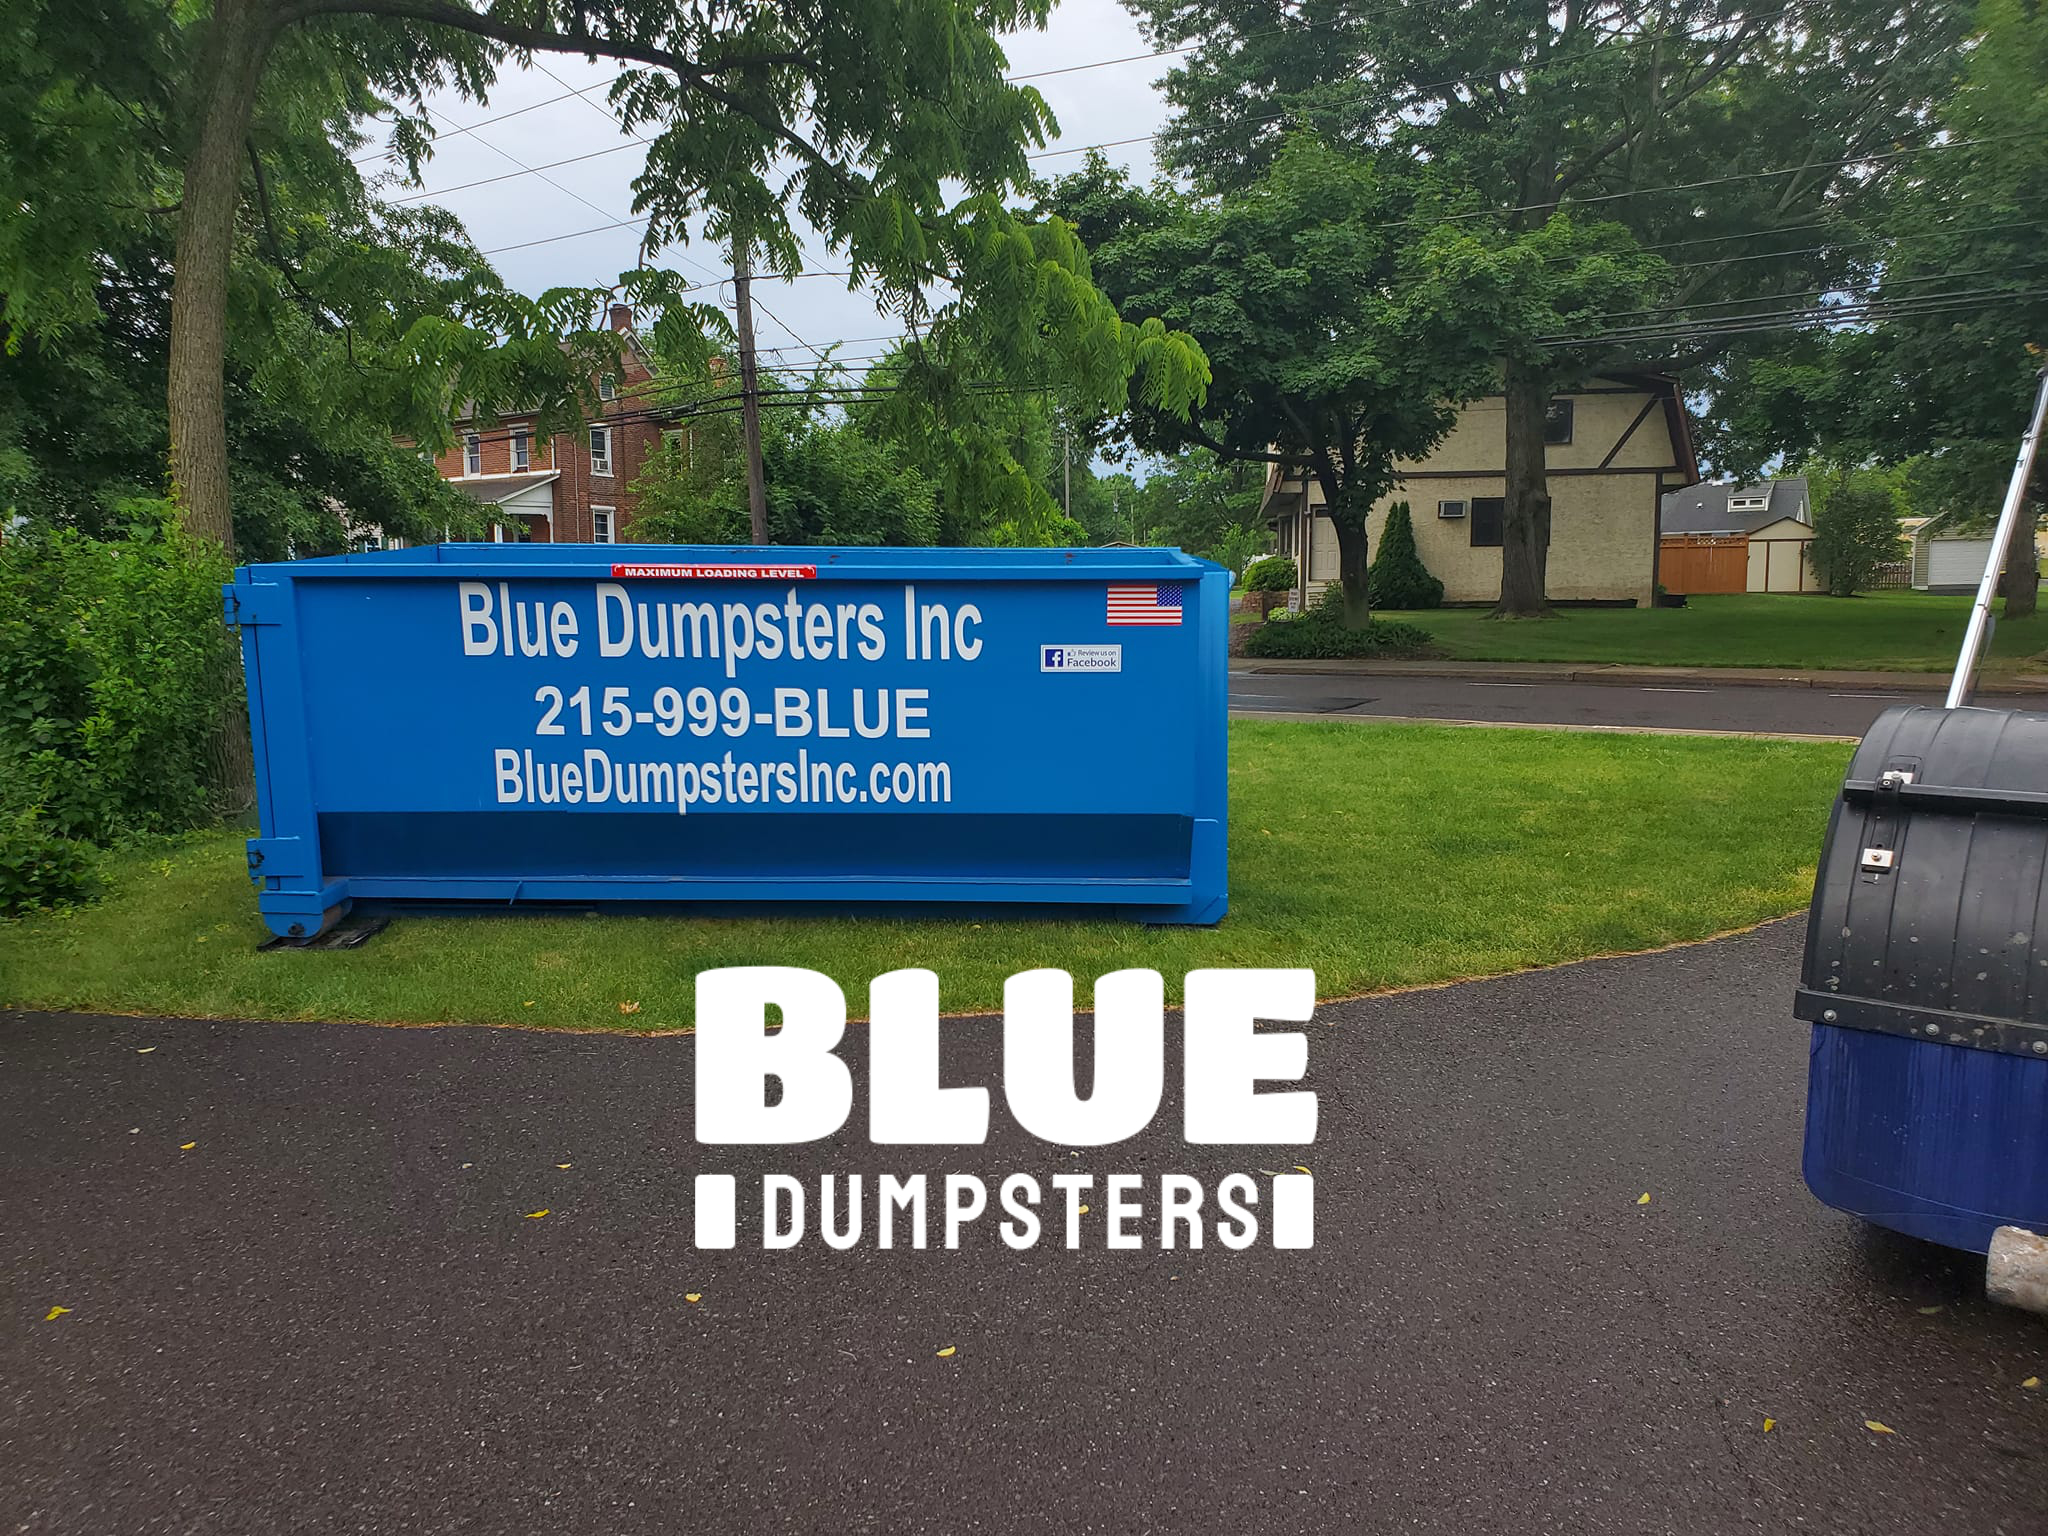 Local Dumpster Rental Blue Dumpsters Macungie PA for Yard Waste